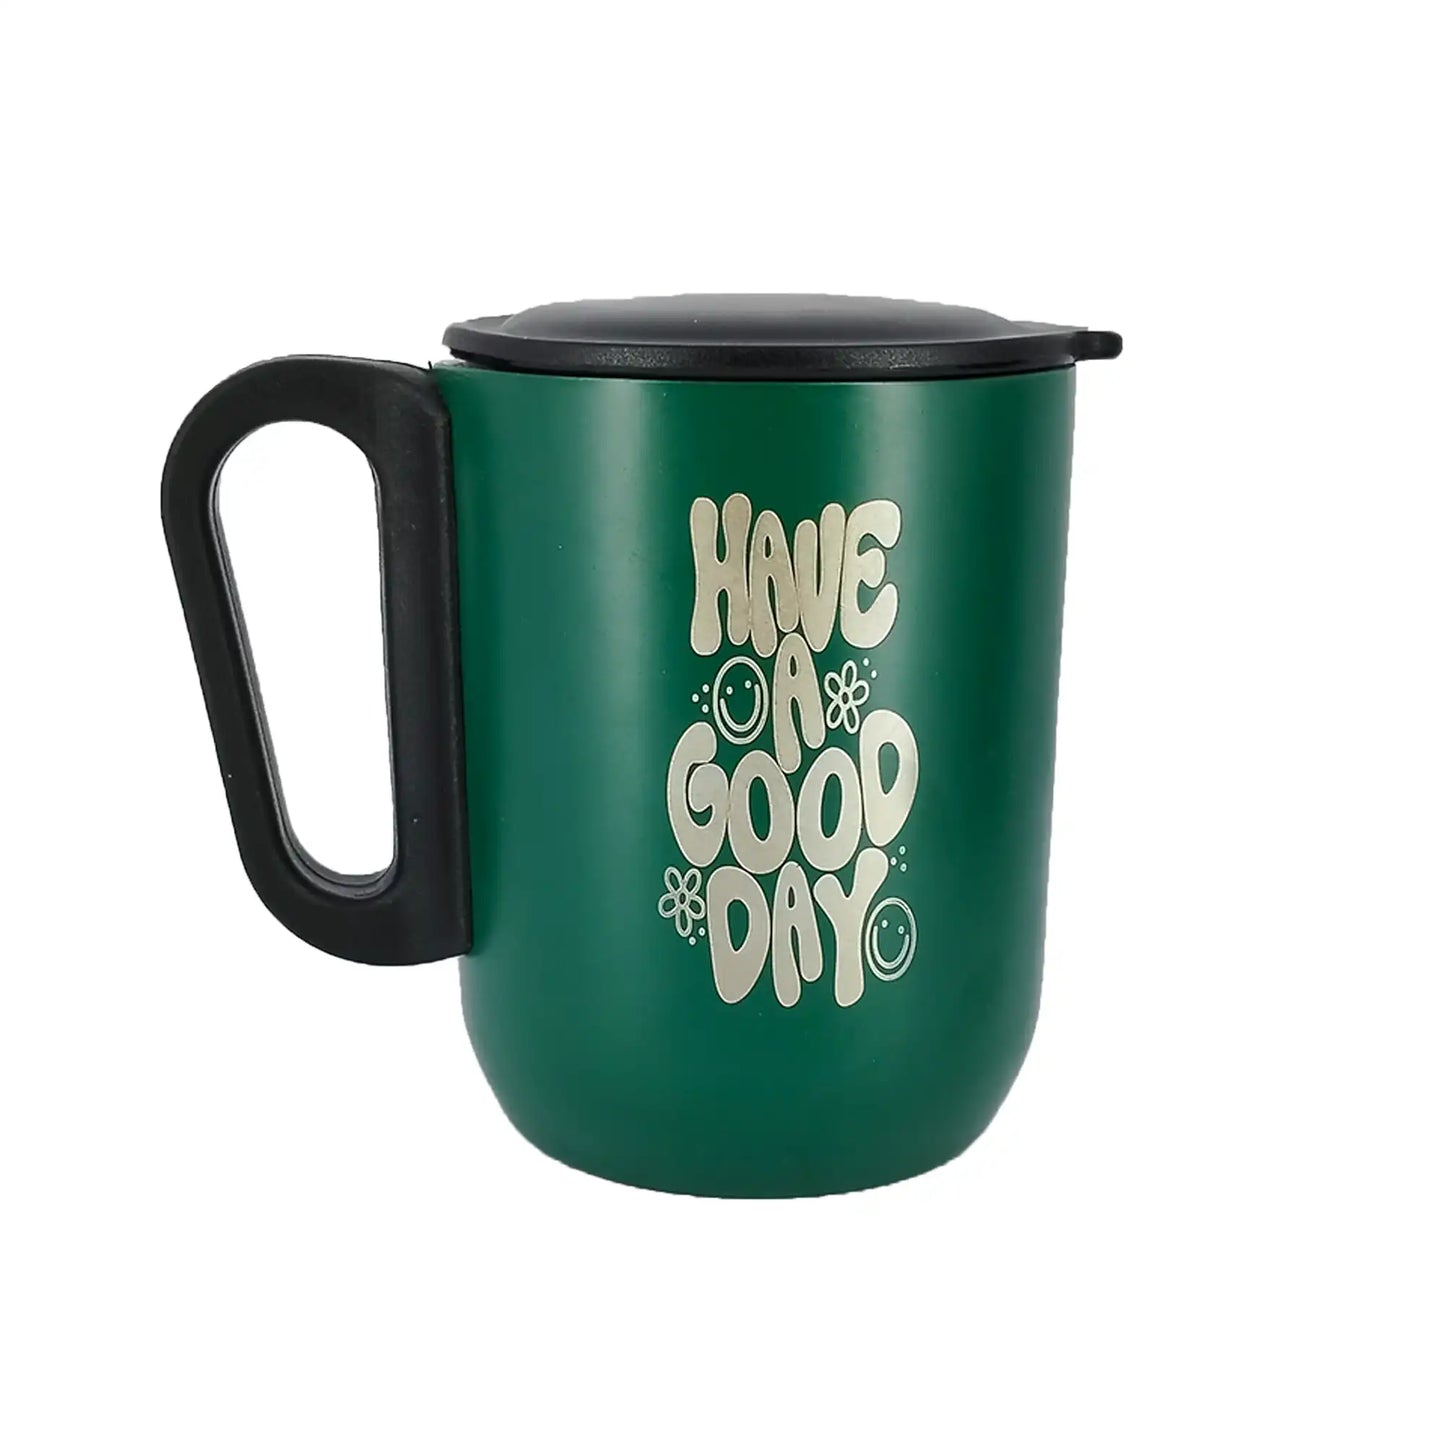 Good Day Stainless Steel Mugs